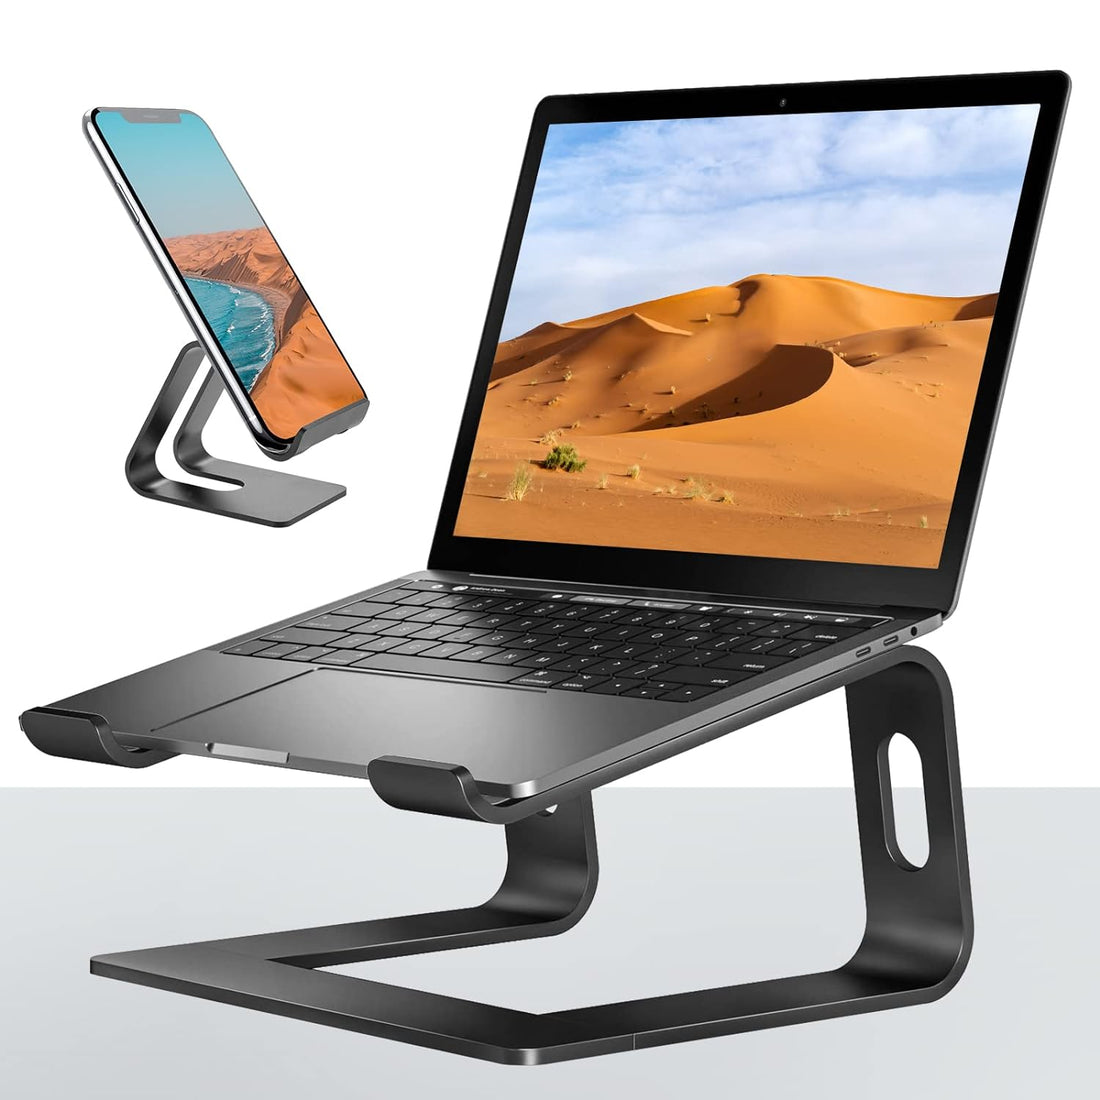 VOCOFO Laptop Stand for Desk Aluminum Laptop Riser Holder,with Cell Phone Stand(Black)